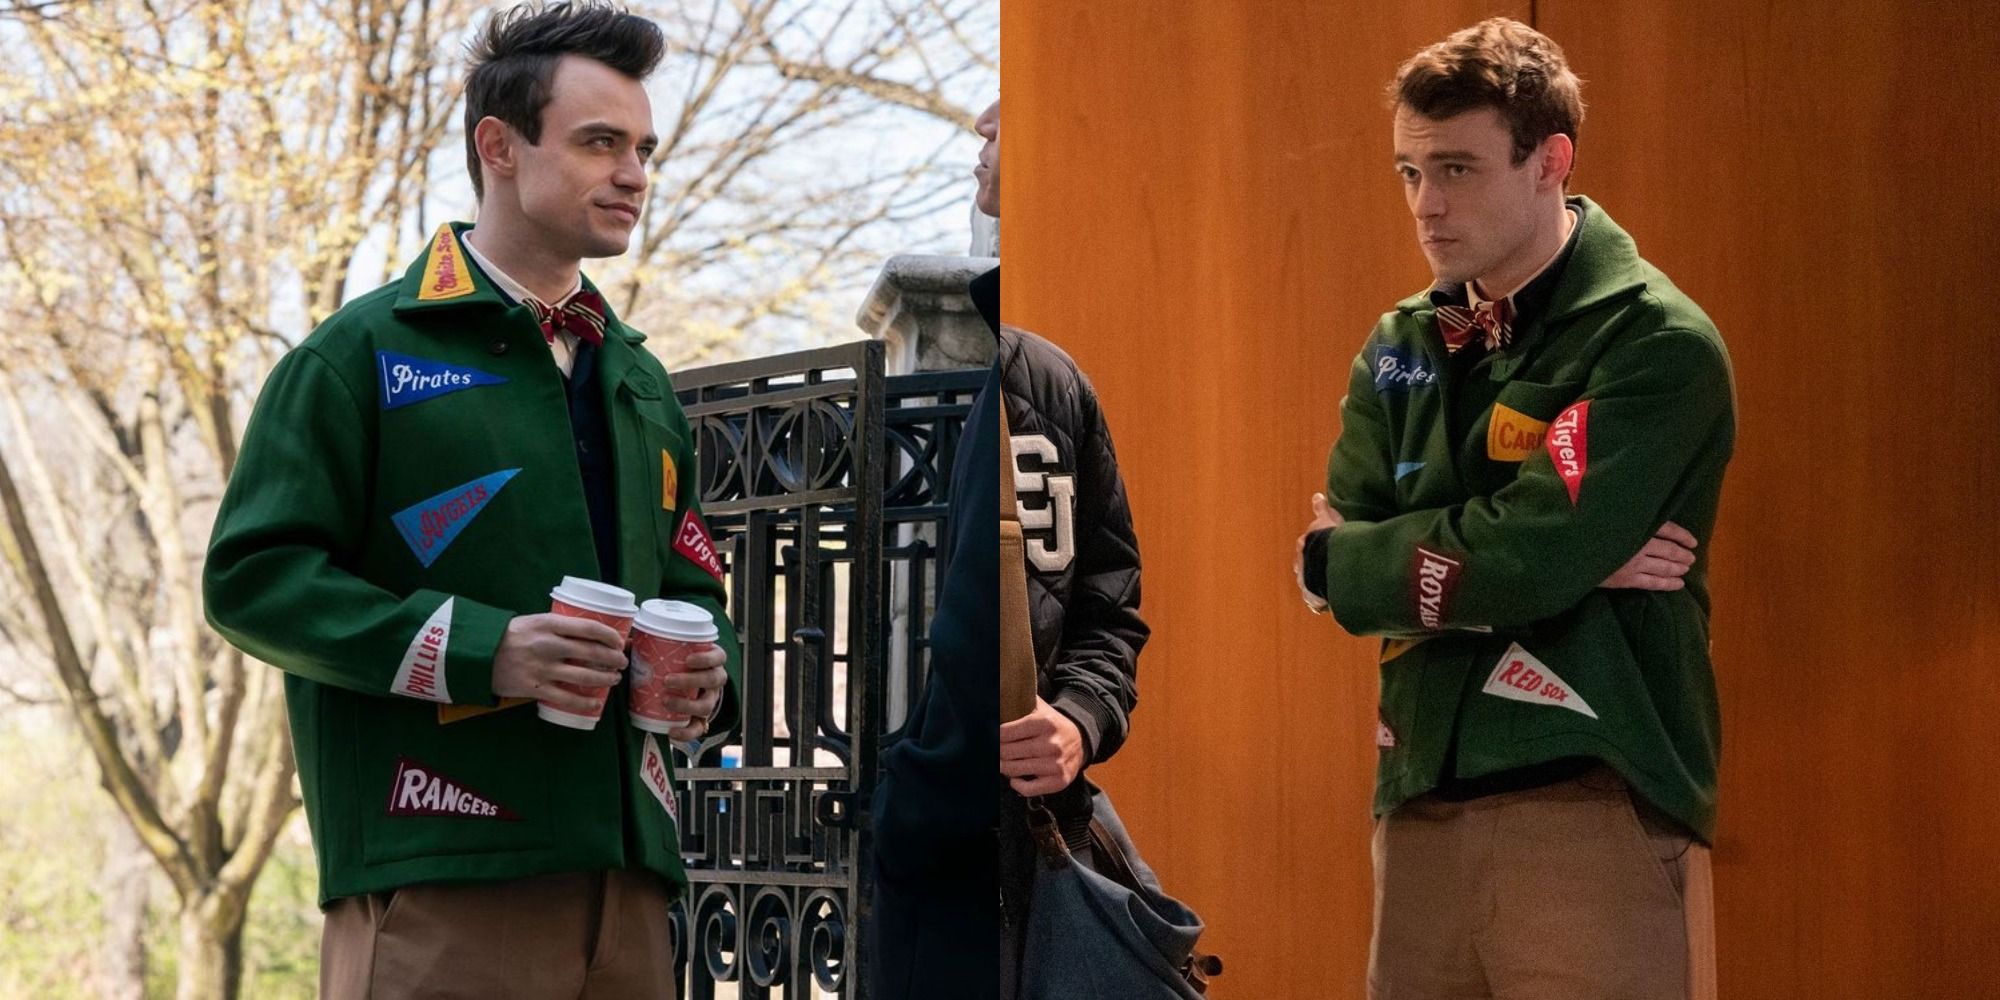 Gossip Girl Reboot The Male Characters 10 Best Outfits